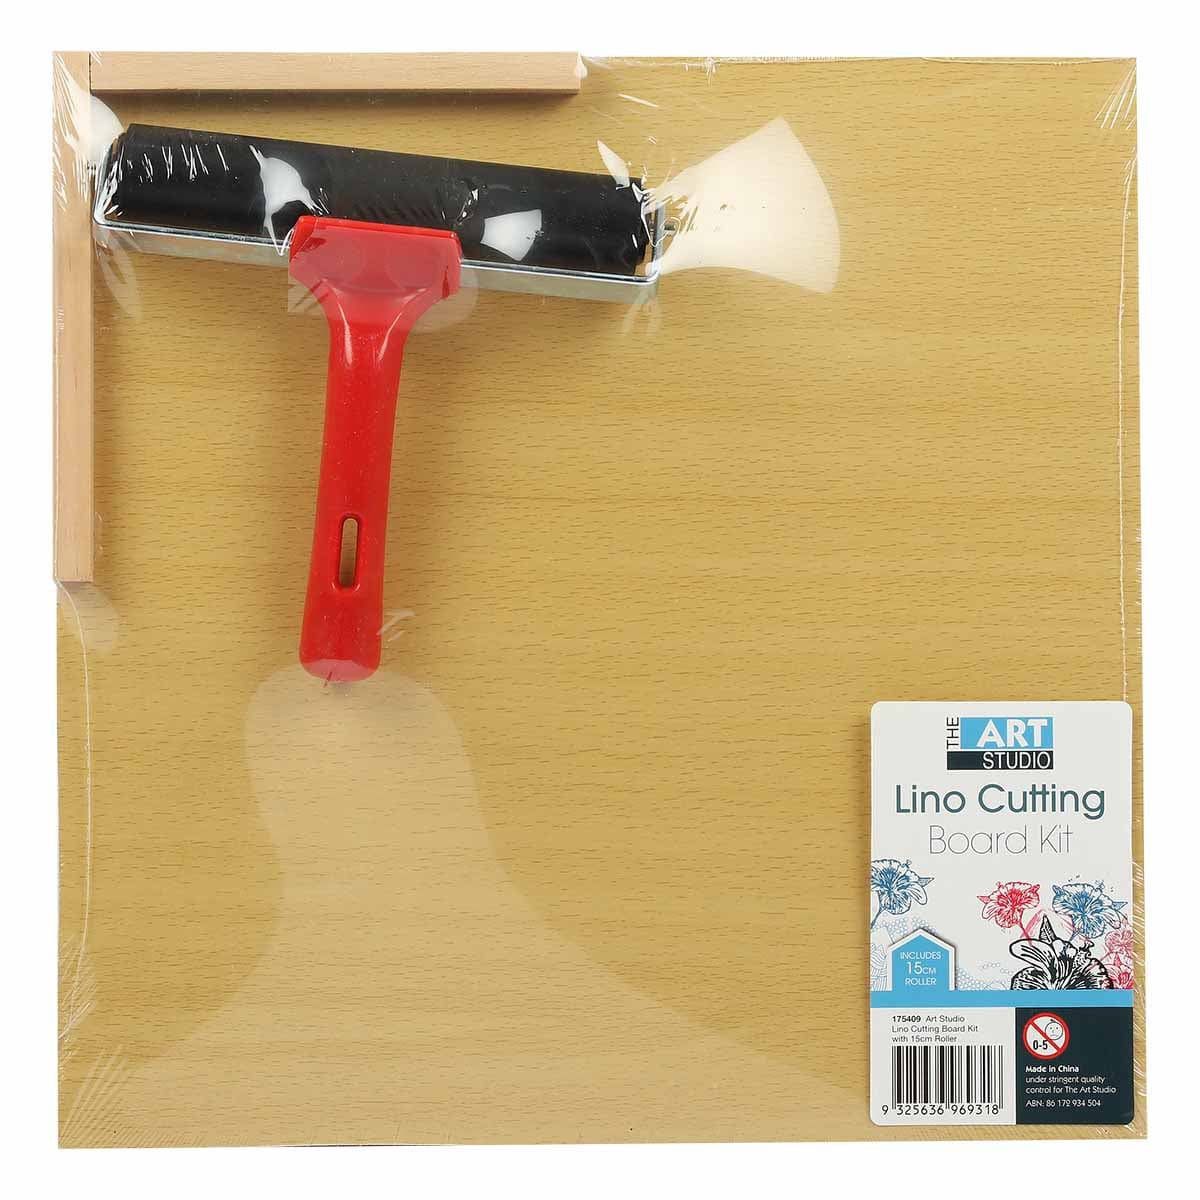 Image of The Art Studio Lino Cutting Board Kit With 15cm Roller